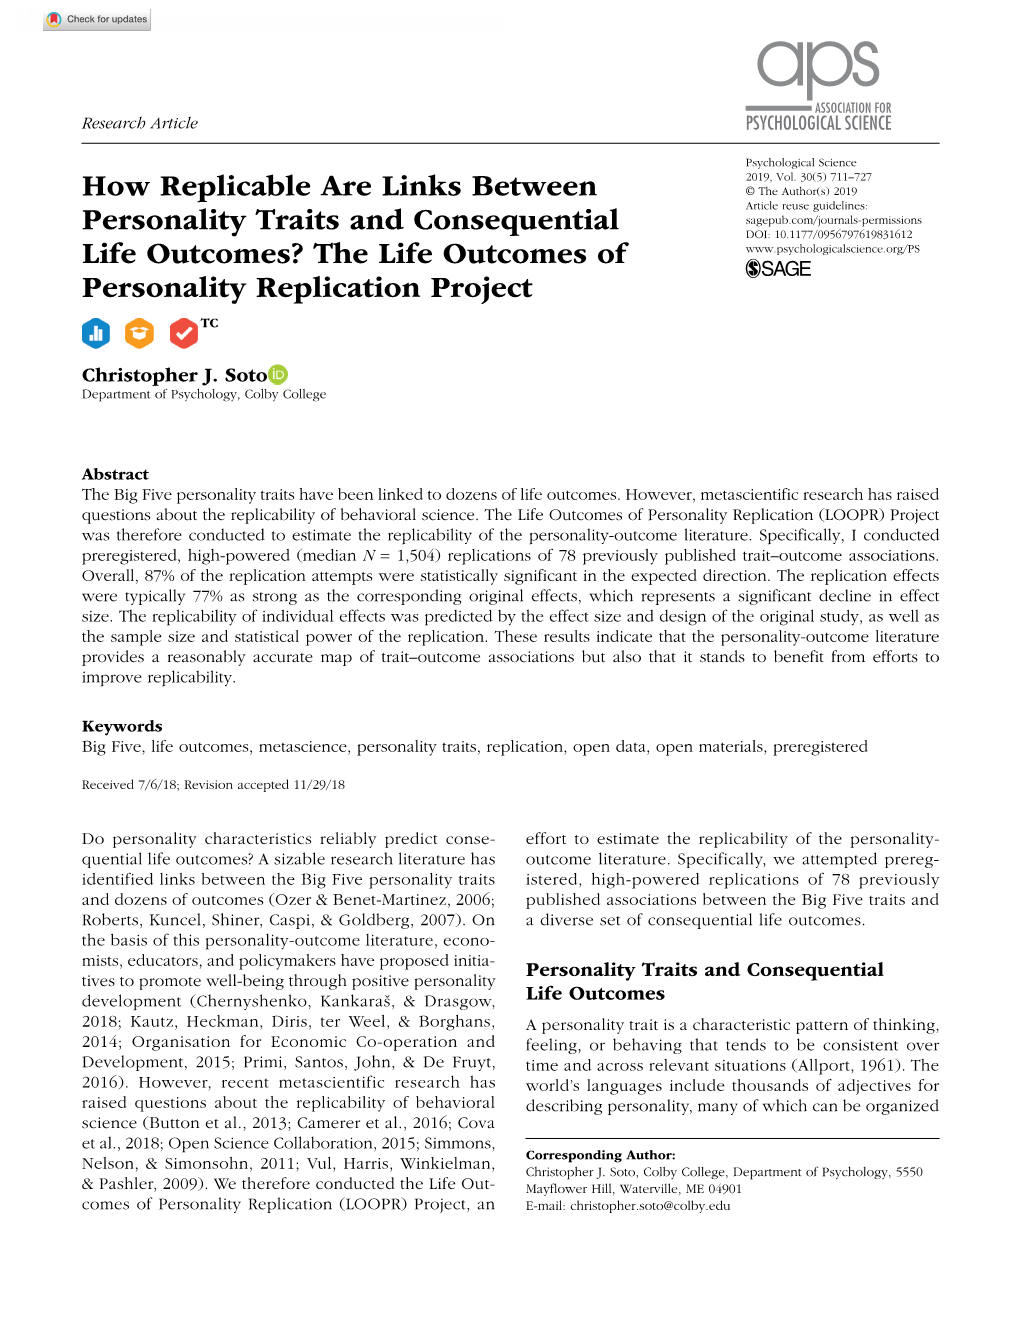 The Life Outcomes of Personality Replication (LOOPR) Project Was Therefore Conducted to Estimate the Replicability of the Personality-Outcome Literature